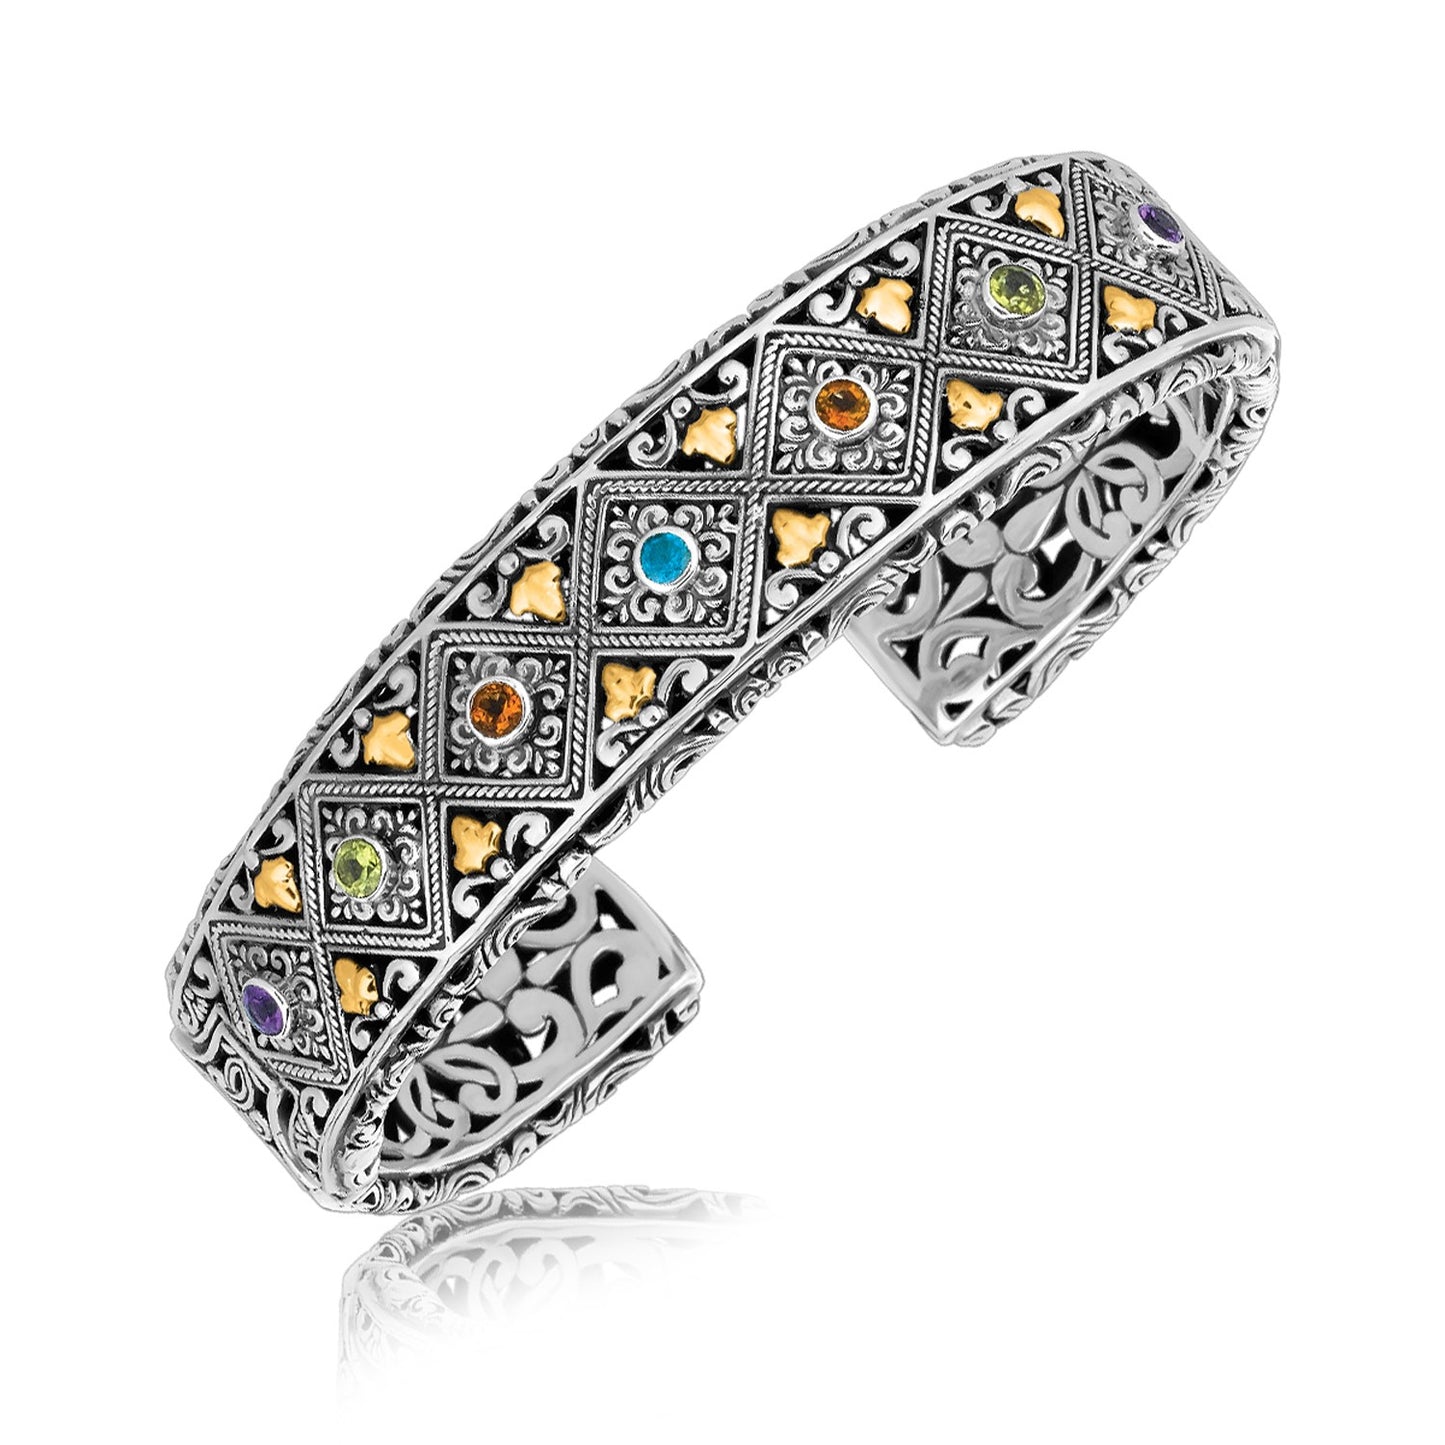 18K Yellow Gold and Sterling Silver Open Cuff with Diamond Patterns and Multi Stone Embellishments